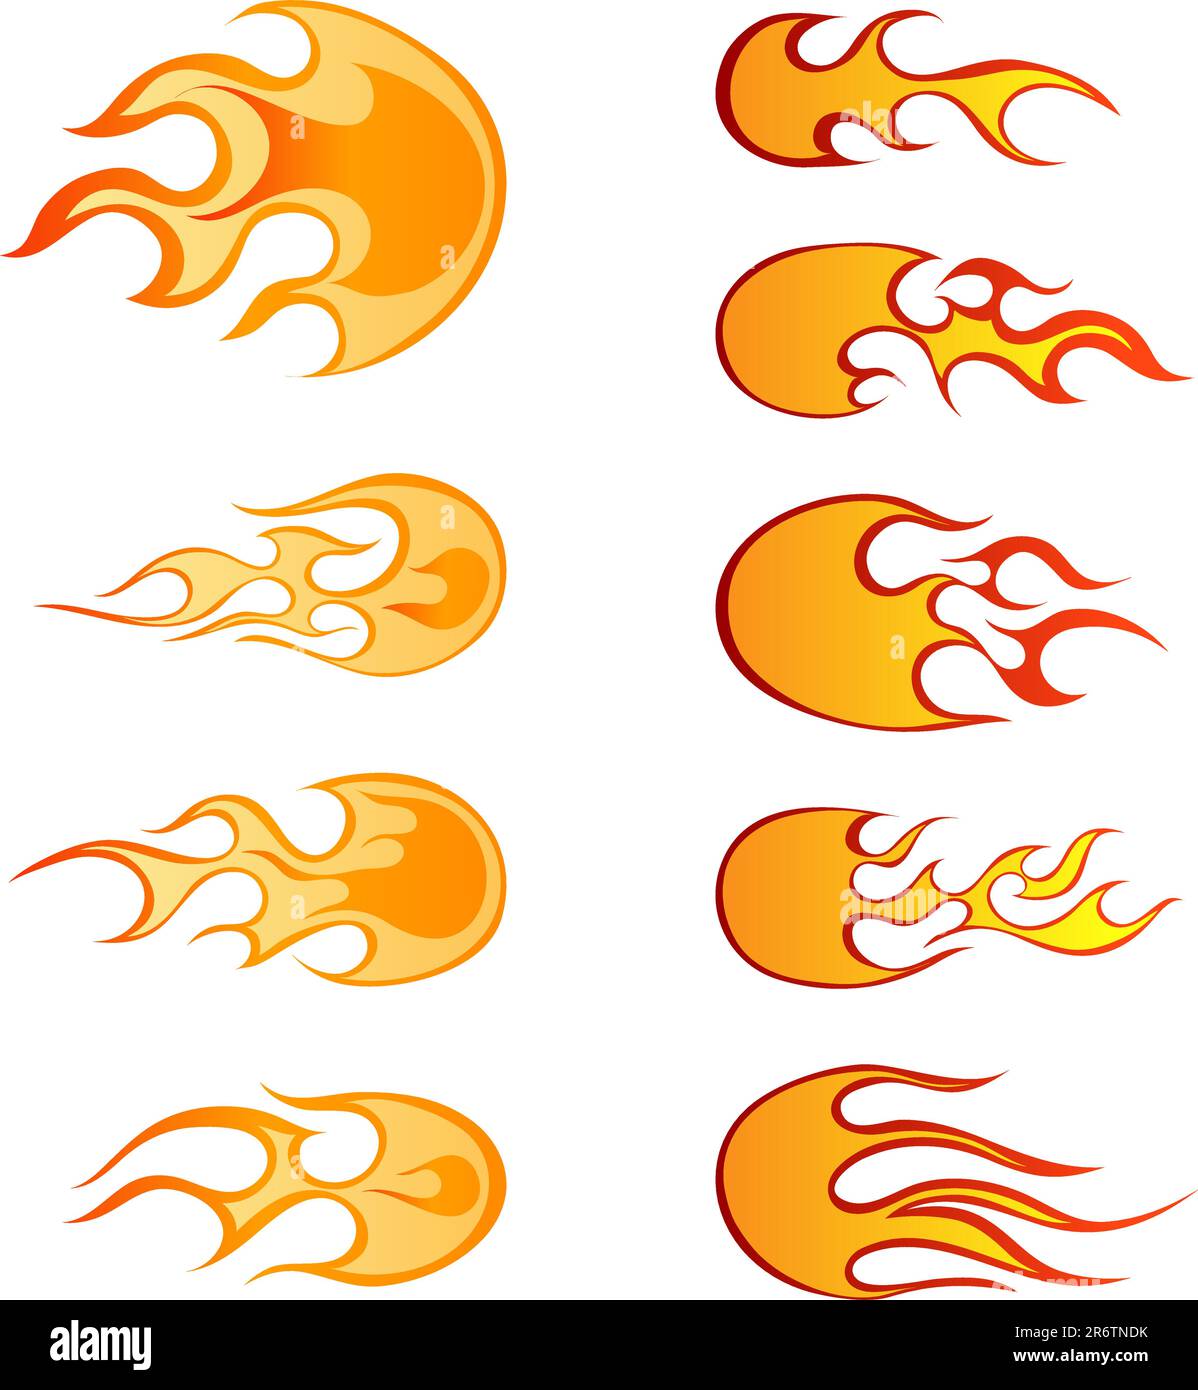 Set of different fireballs patterns for design use Stock Vector